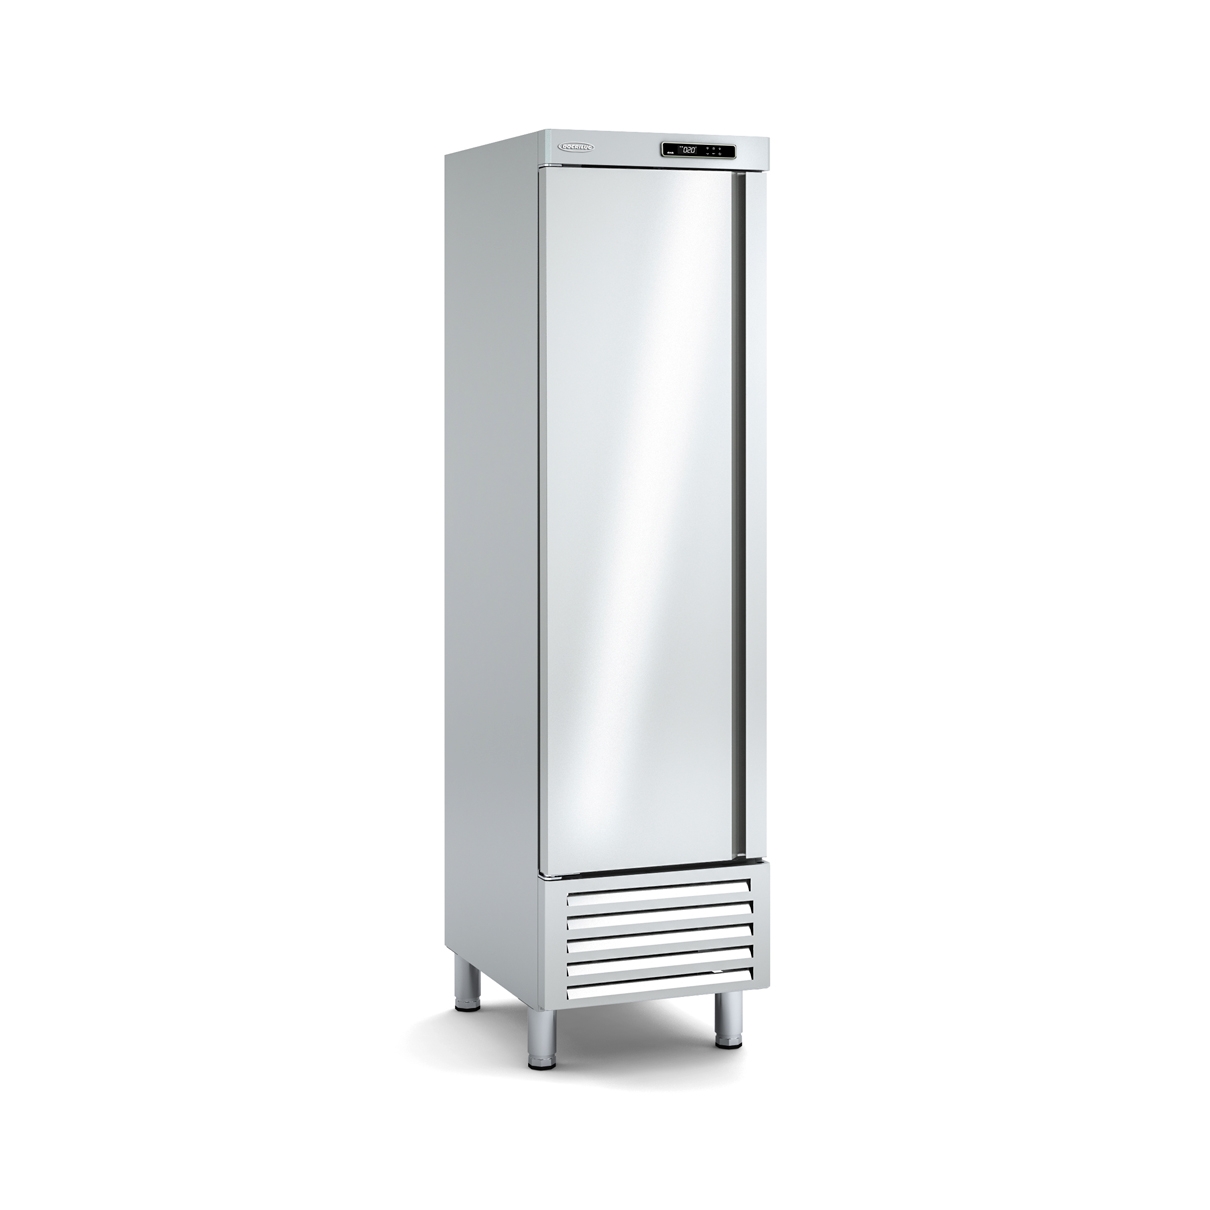 Snack Refrigerated Cabinet AR-55-1